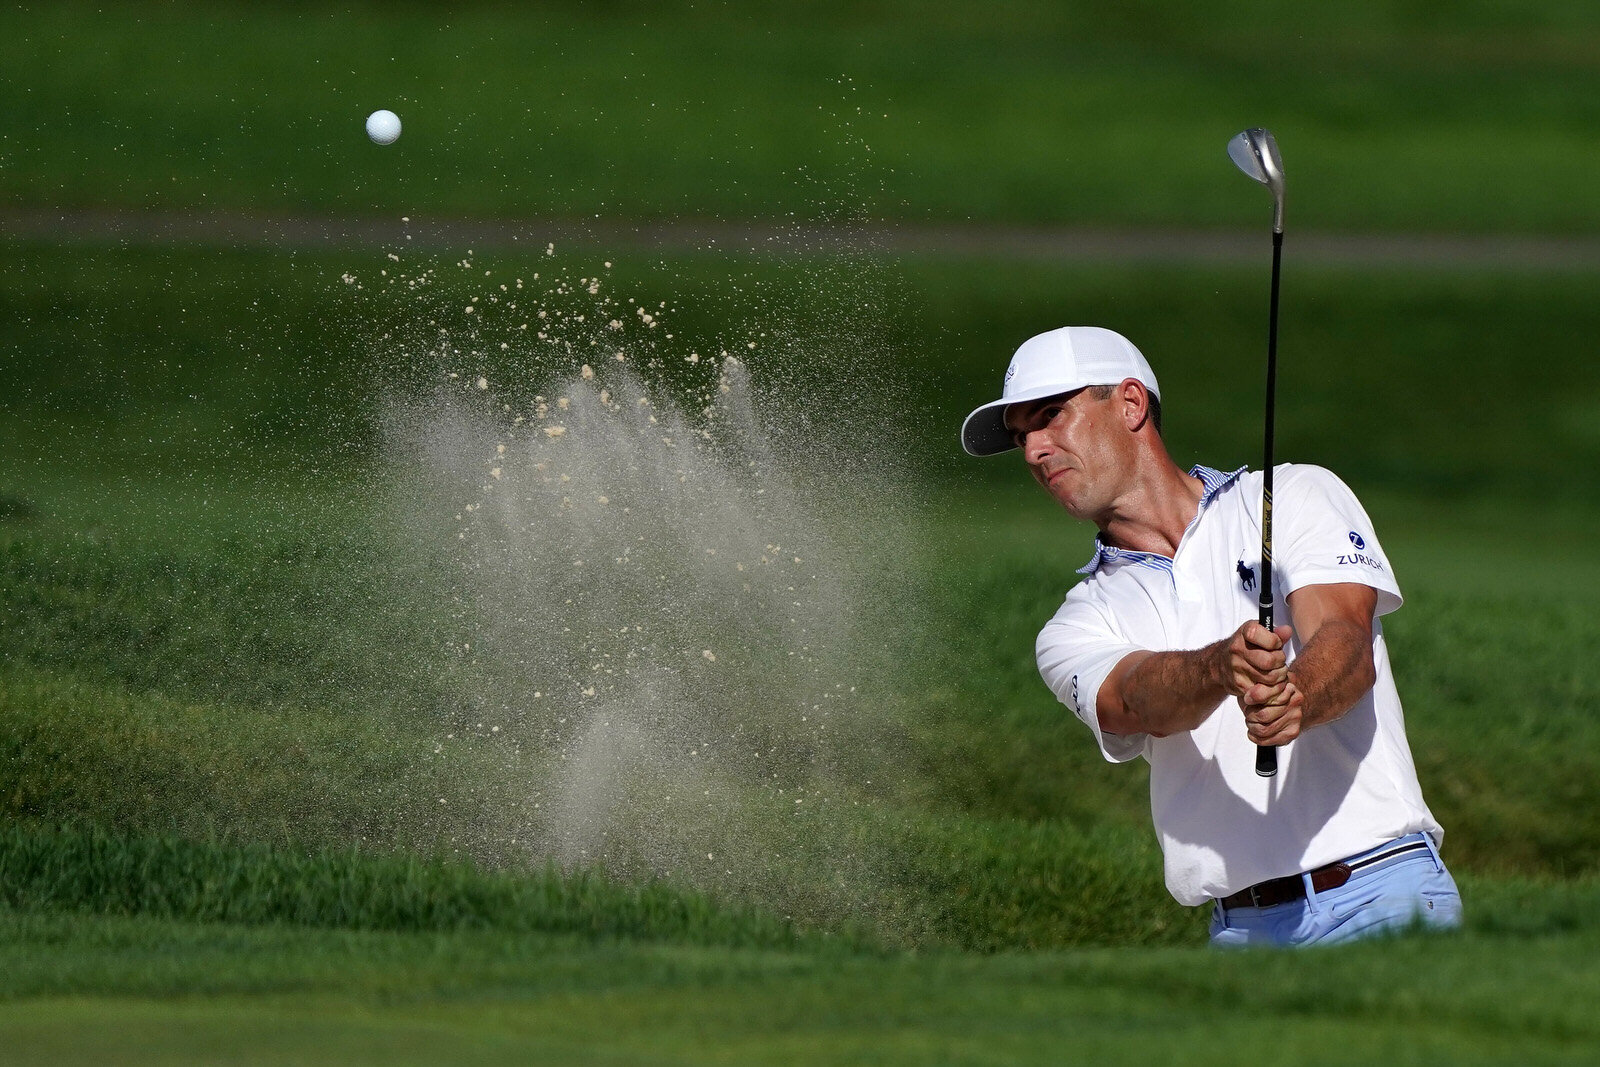  OLYMPIA FIELDS, ILLINOIS - AUGUST 27: Billy Horschel of the United States plays a shot from a bunker on the eighth hole during the first round of the BMW Championship on the North Course at Olympia Fields Country Club on August 27, 2020 in Olympia F